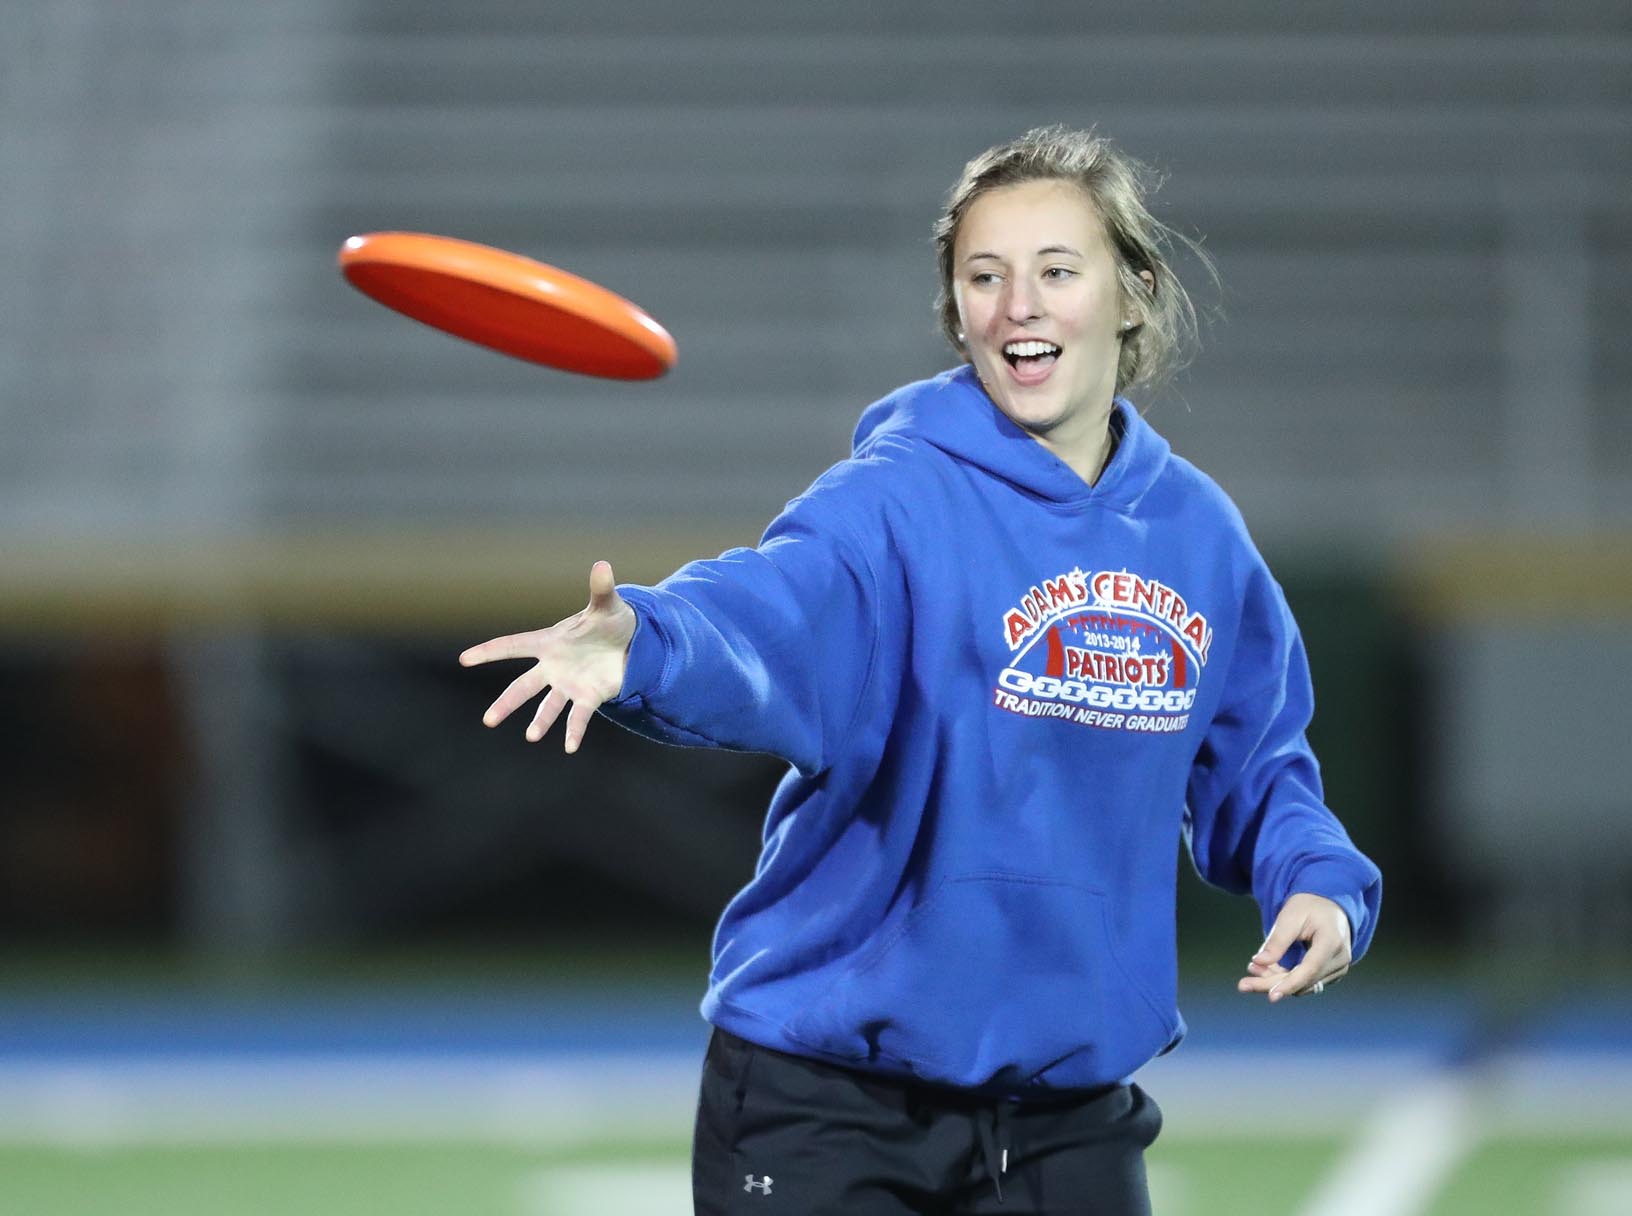 UNK Campus Recreation offers a number of nontraditional intramural sports and activities, including ultimate Frisbee, human foosball, esports, table tennis, cornhole and Spikeball.